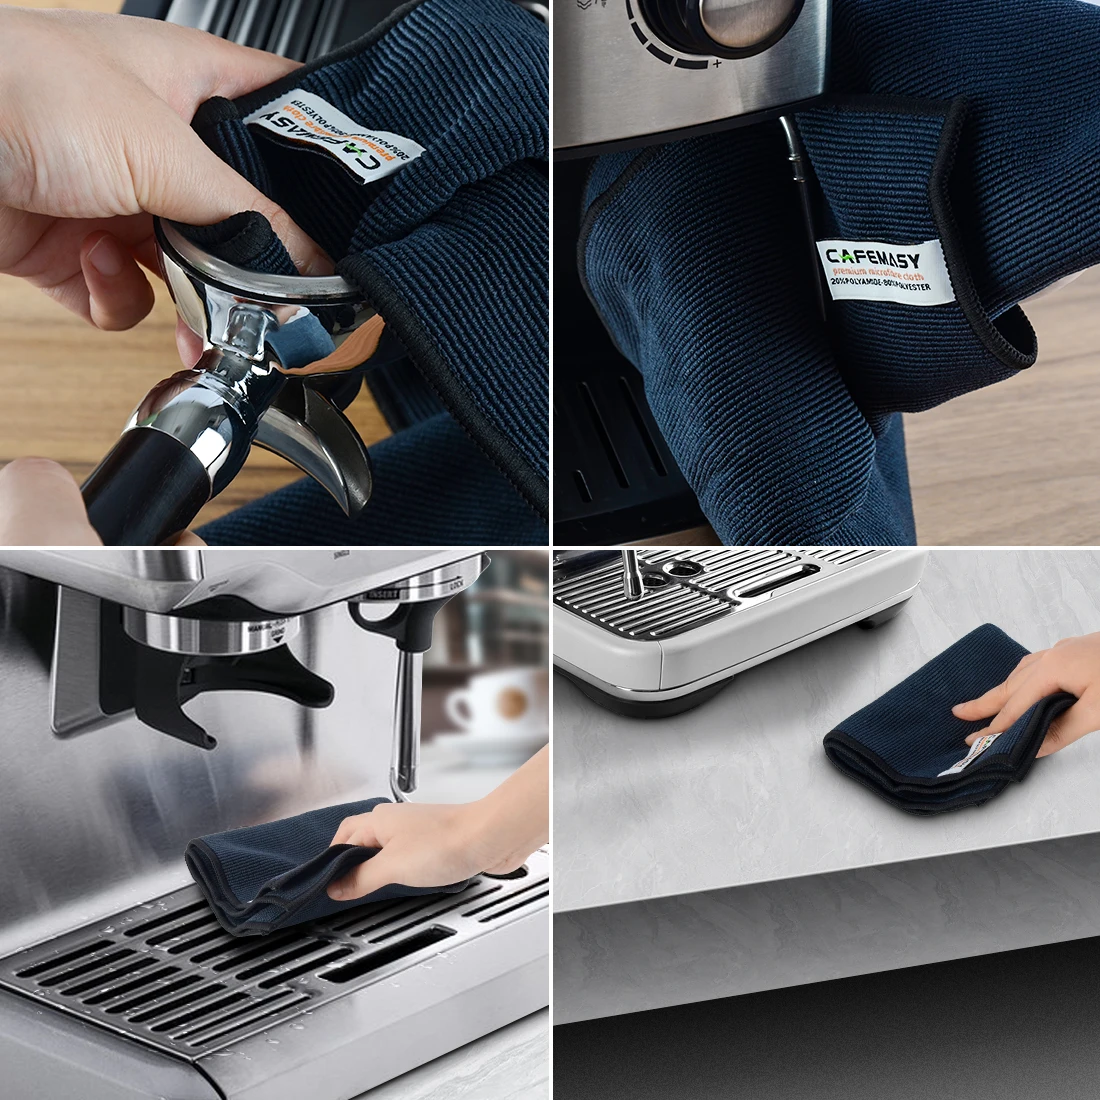 https://ae01.alicdn.com/kf/S6275429ea5794ee3a47907e9cd12a795u/Coffee-Bar-Towels-Barista-Cleaning-Cloths-Professional-Espresso-Coffee-Machine-Cleaning-Cloth-Household-Kitchen-Accessories.jpg